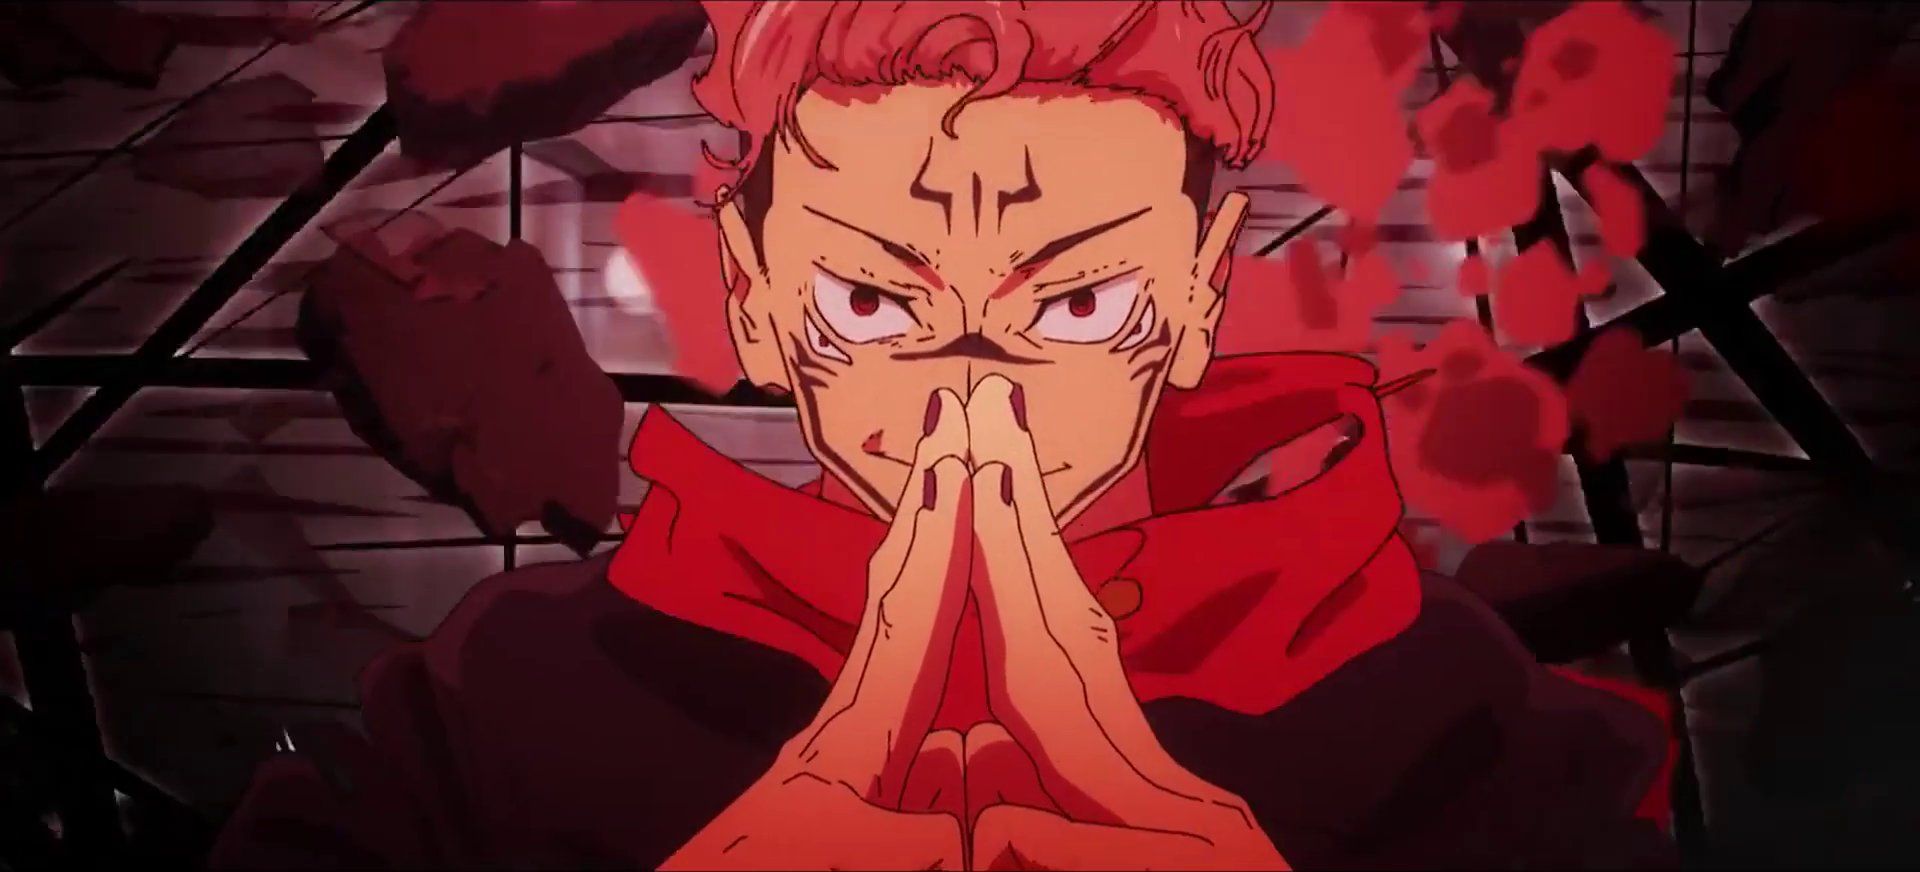 Anime Underground - The 20 Best Cursed Techniques From 'Jujutsu Kaisen' So  Far Vote here: rnkr.co/best-cursed-techniques-from-jujutsu | Facebook